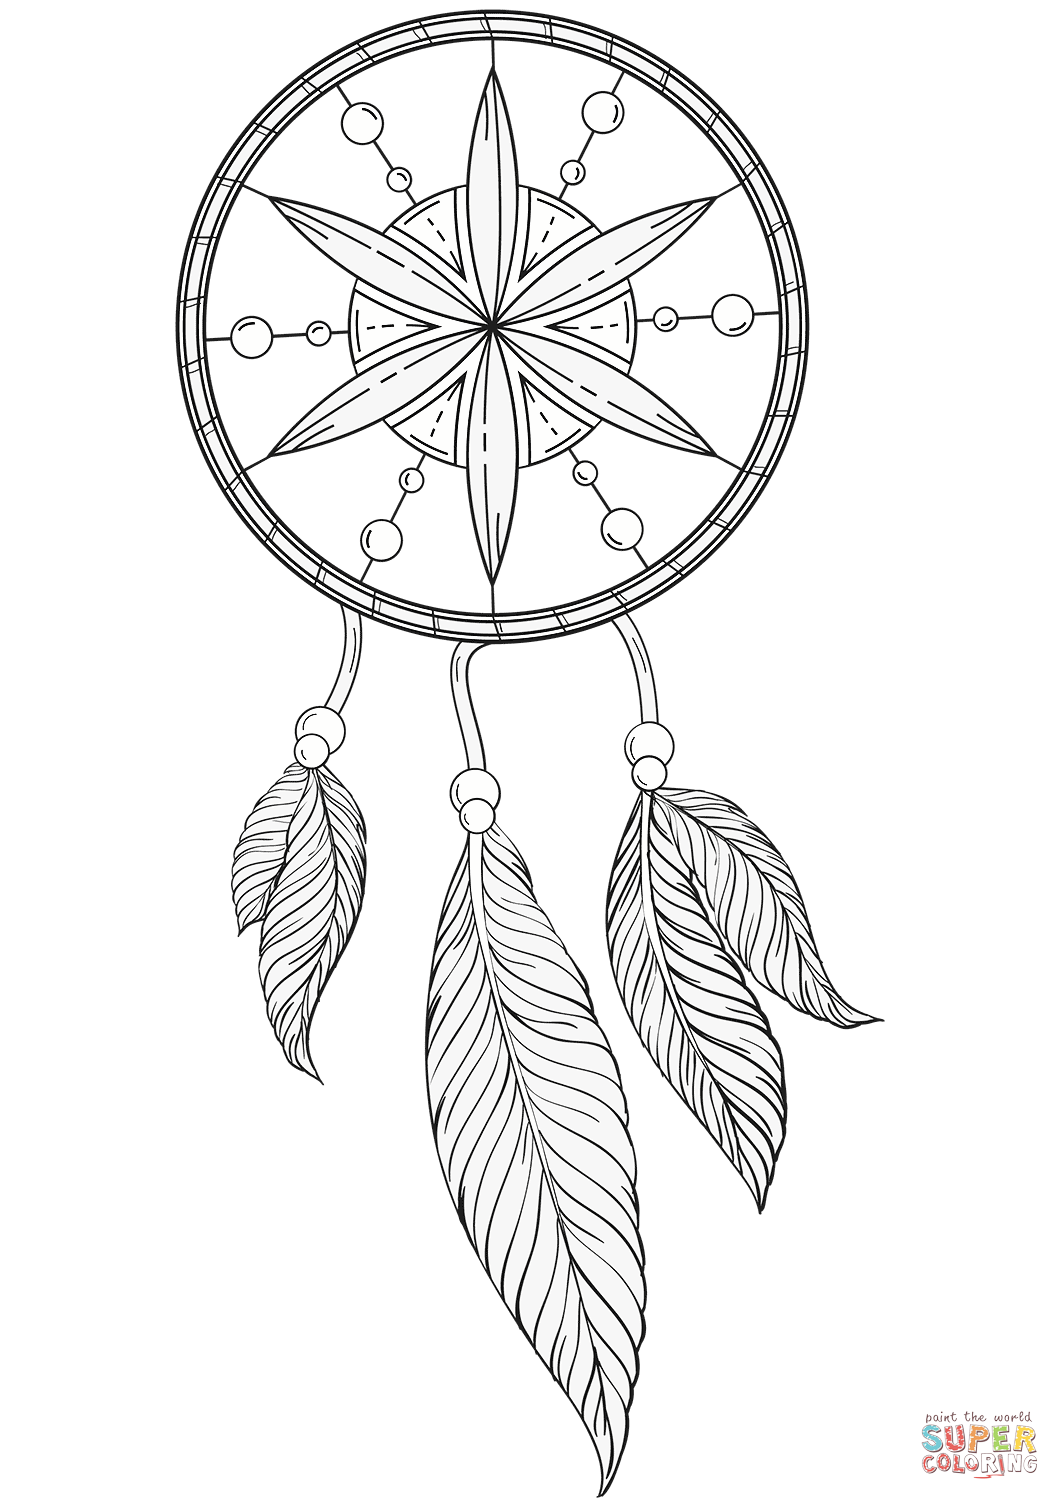 Dream catcher coloring page free printable coloring pages